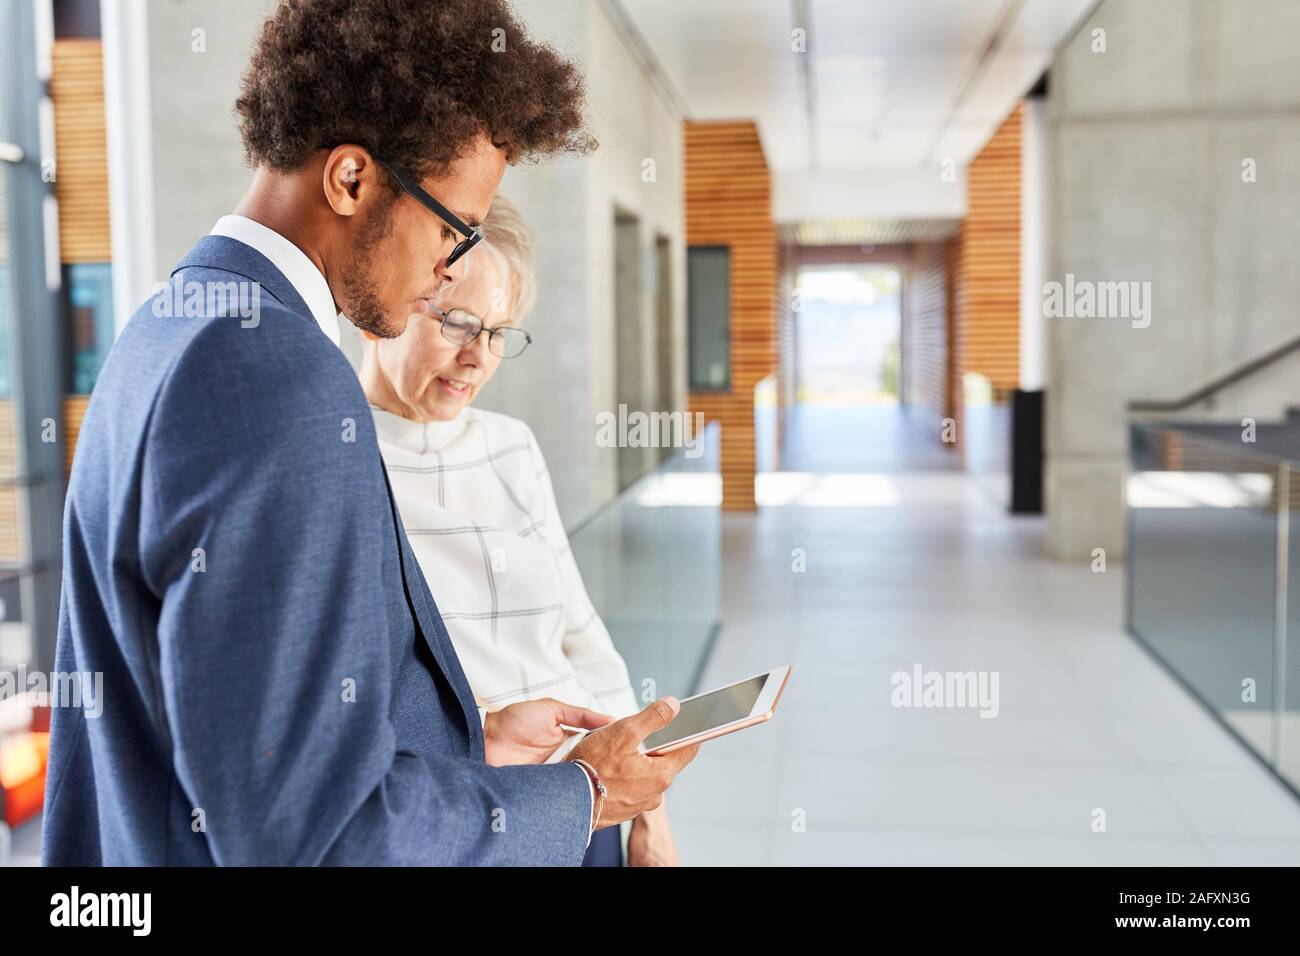 Two business people researching the Internet on a tablet computer Stock Photo